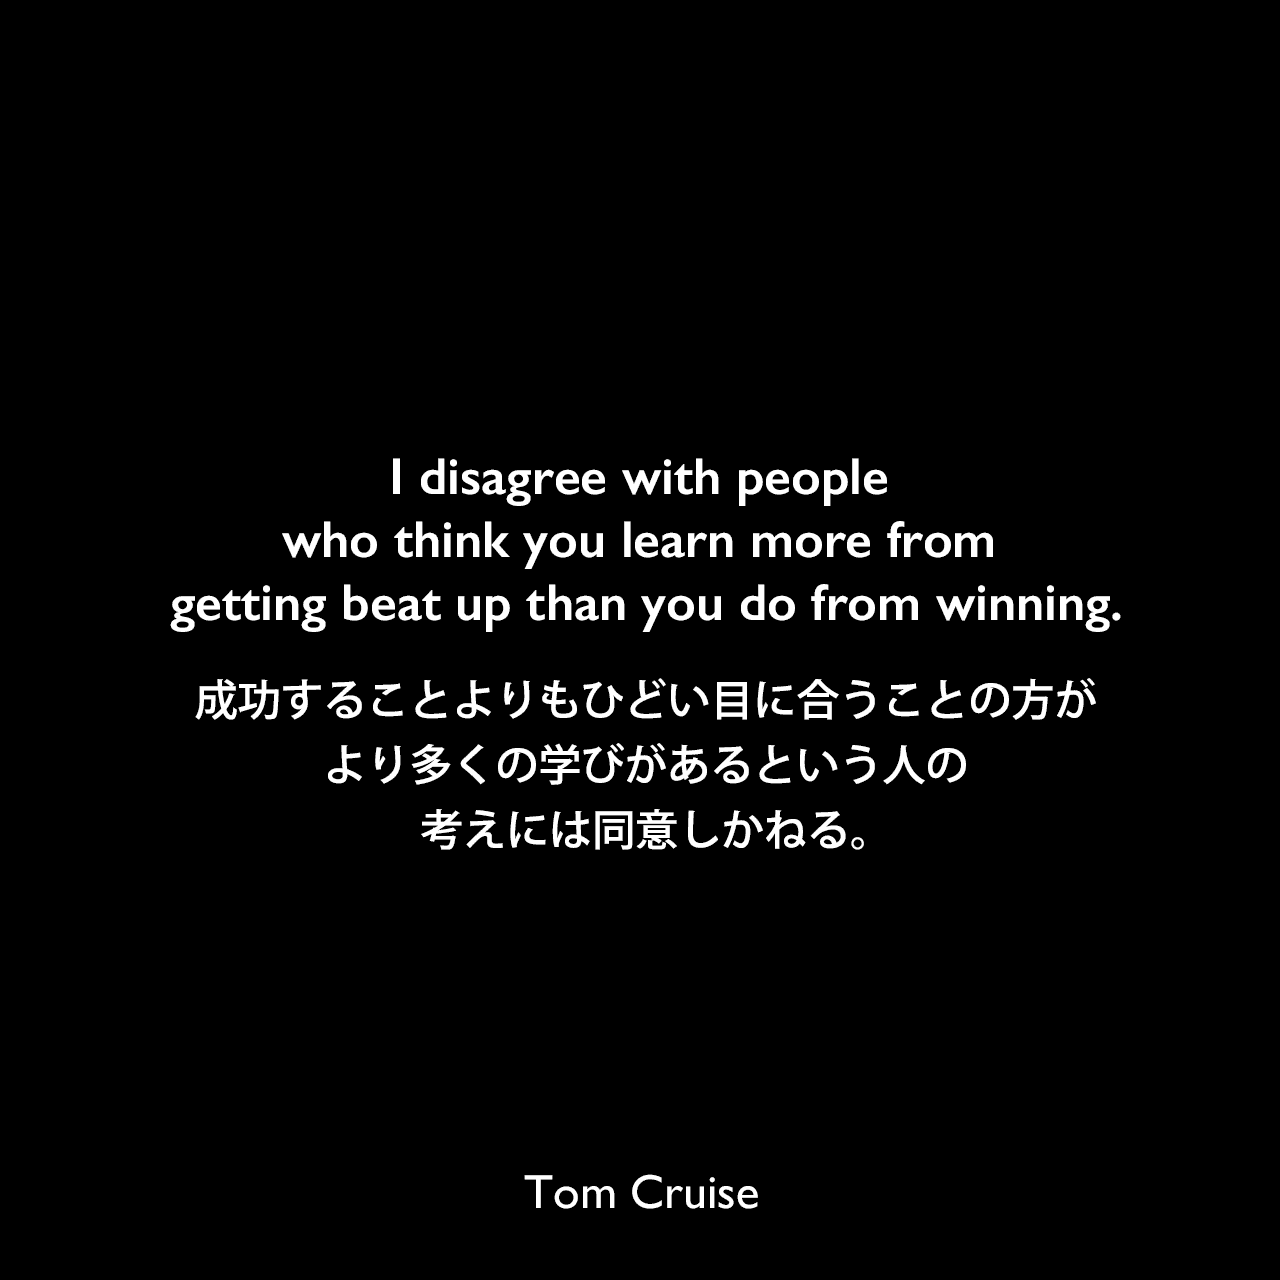 I disagree with people who think you learn more from getting beat up than you do from winning.成功することよりもひどい目に合うことの方が、より多くの学びがあるという人の考えには同意しかねる。Tom Cruise